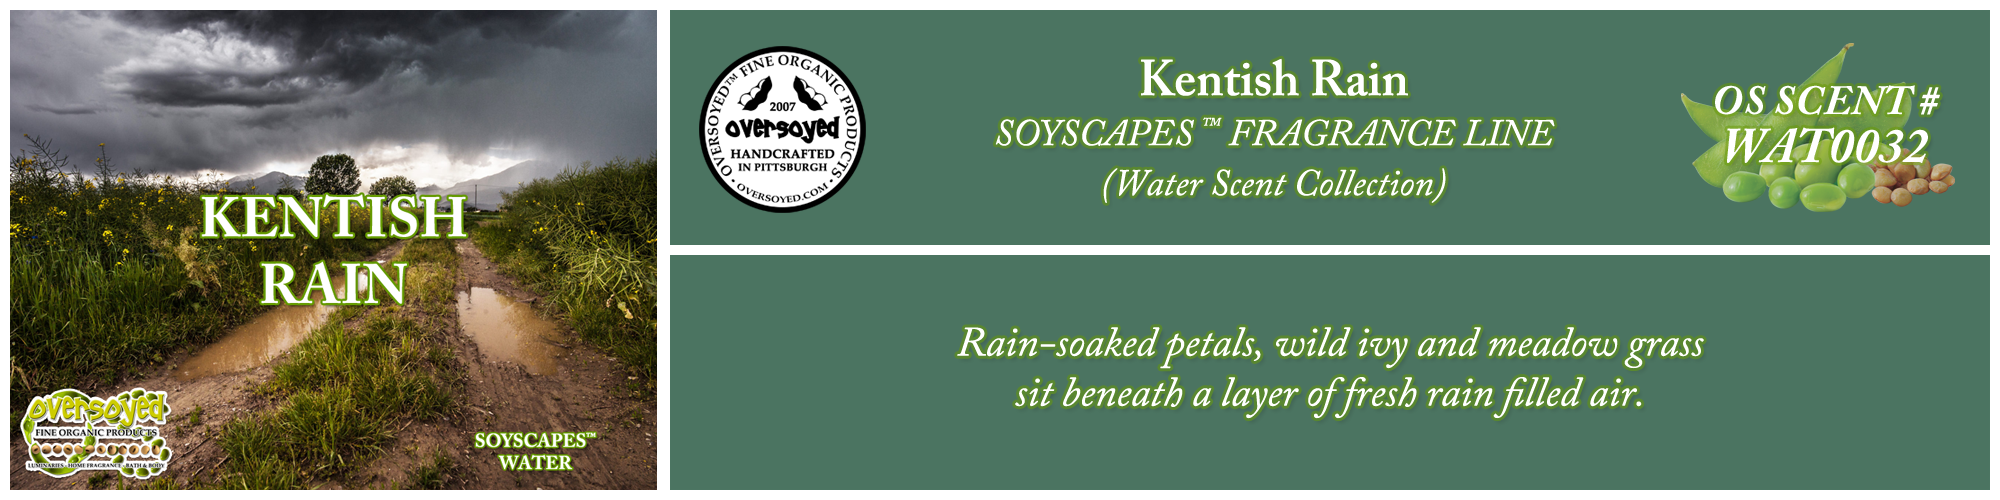 Kentish Rain Handcrafted Products Collection